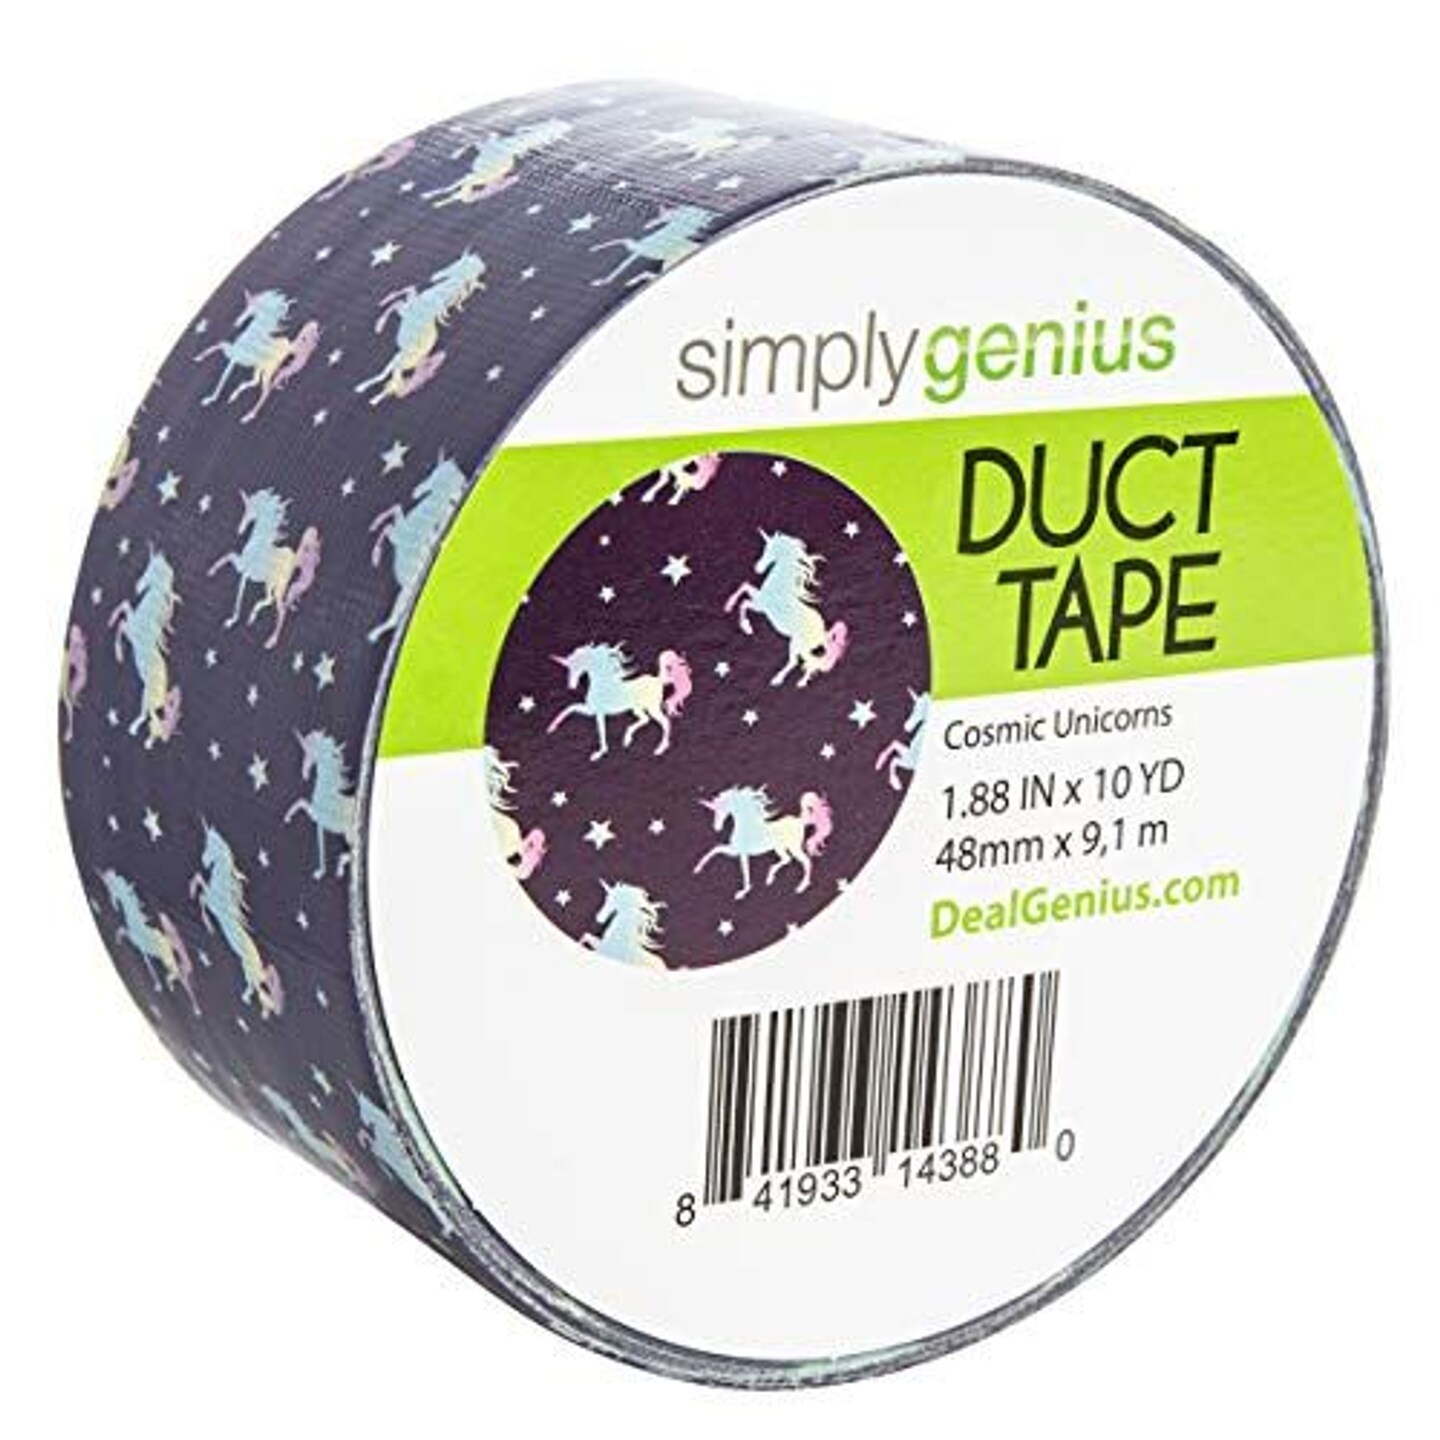 Simply Genius Pattern Duct Tape Heavy Duty - Craft Supplies for Adults - Colored Duct Tape - Single Roll 1.8 in x 10 yards - Colorful Tape for DIY, Craft &#x26; Home Improvement (Cosmic Unicorns)